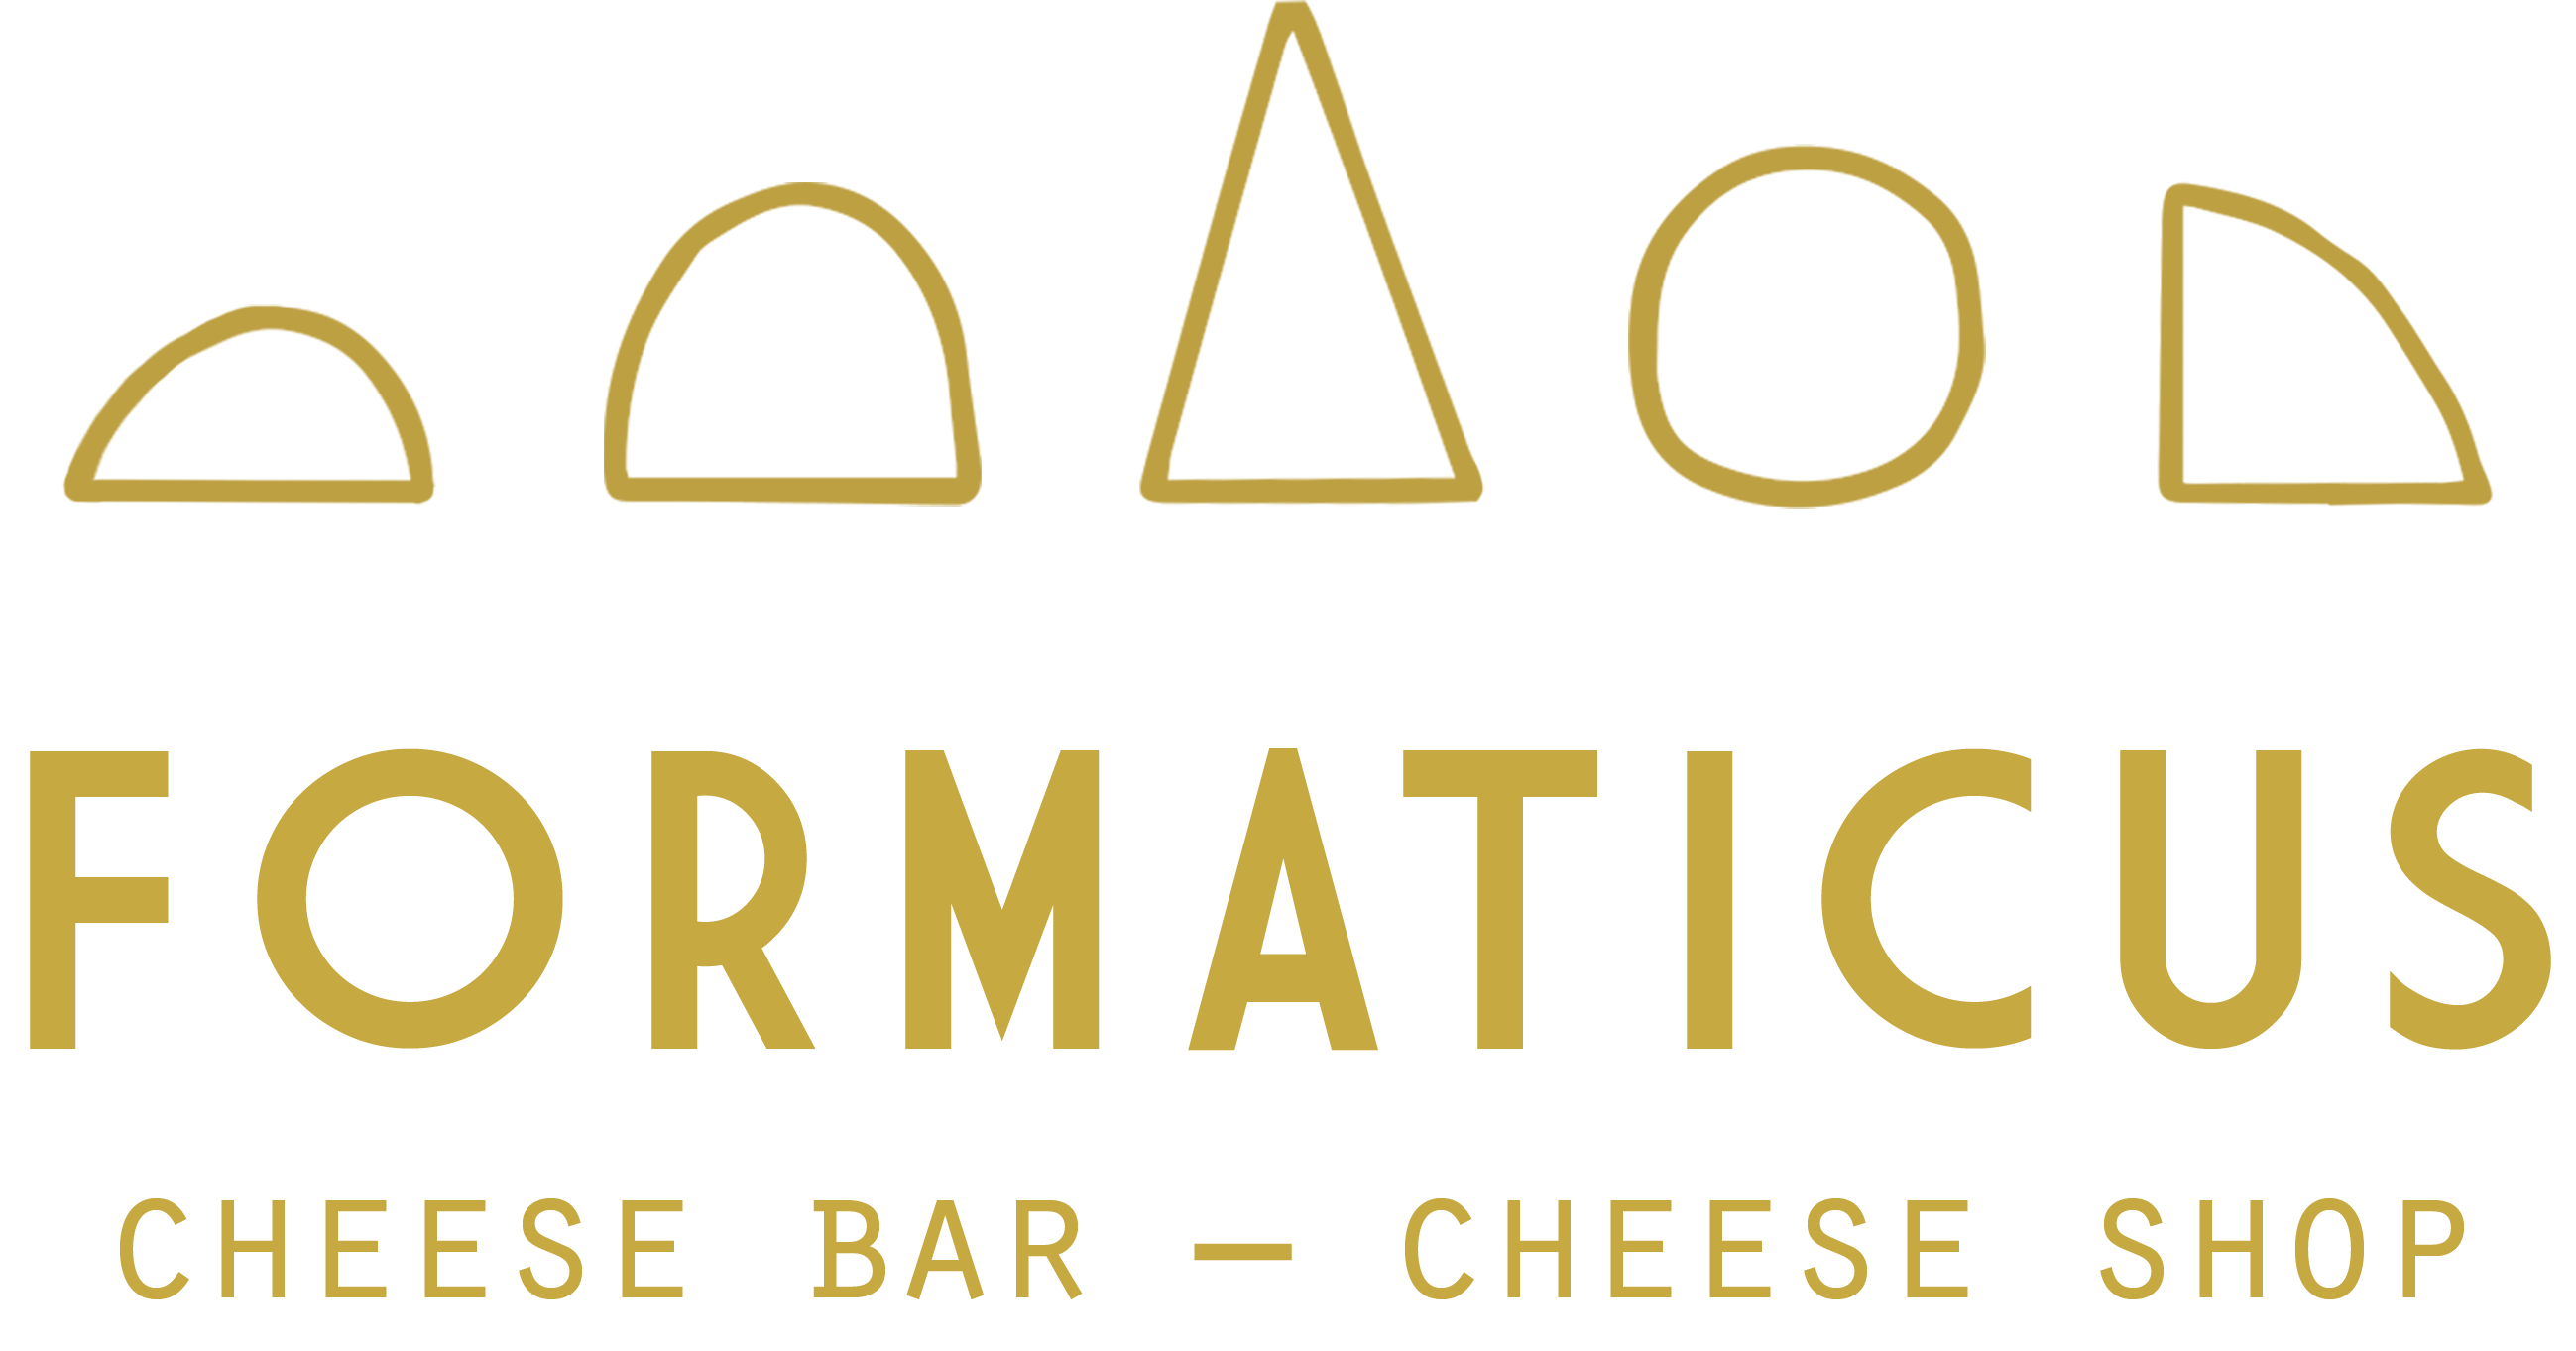 Formaticus - Cheese bar - Cheese shop